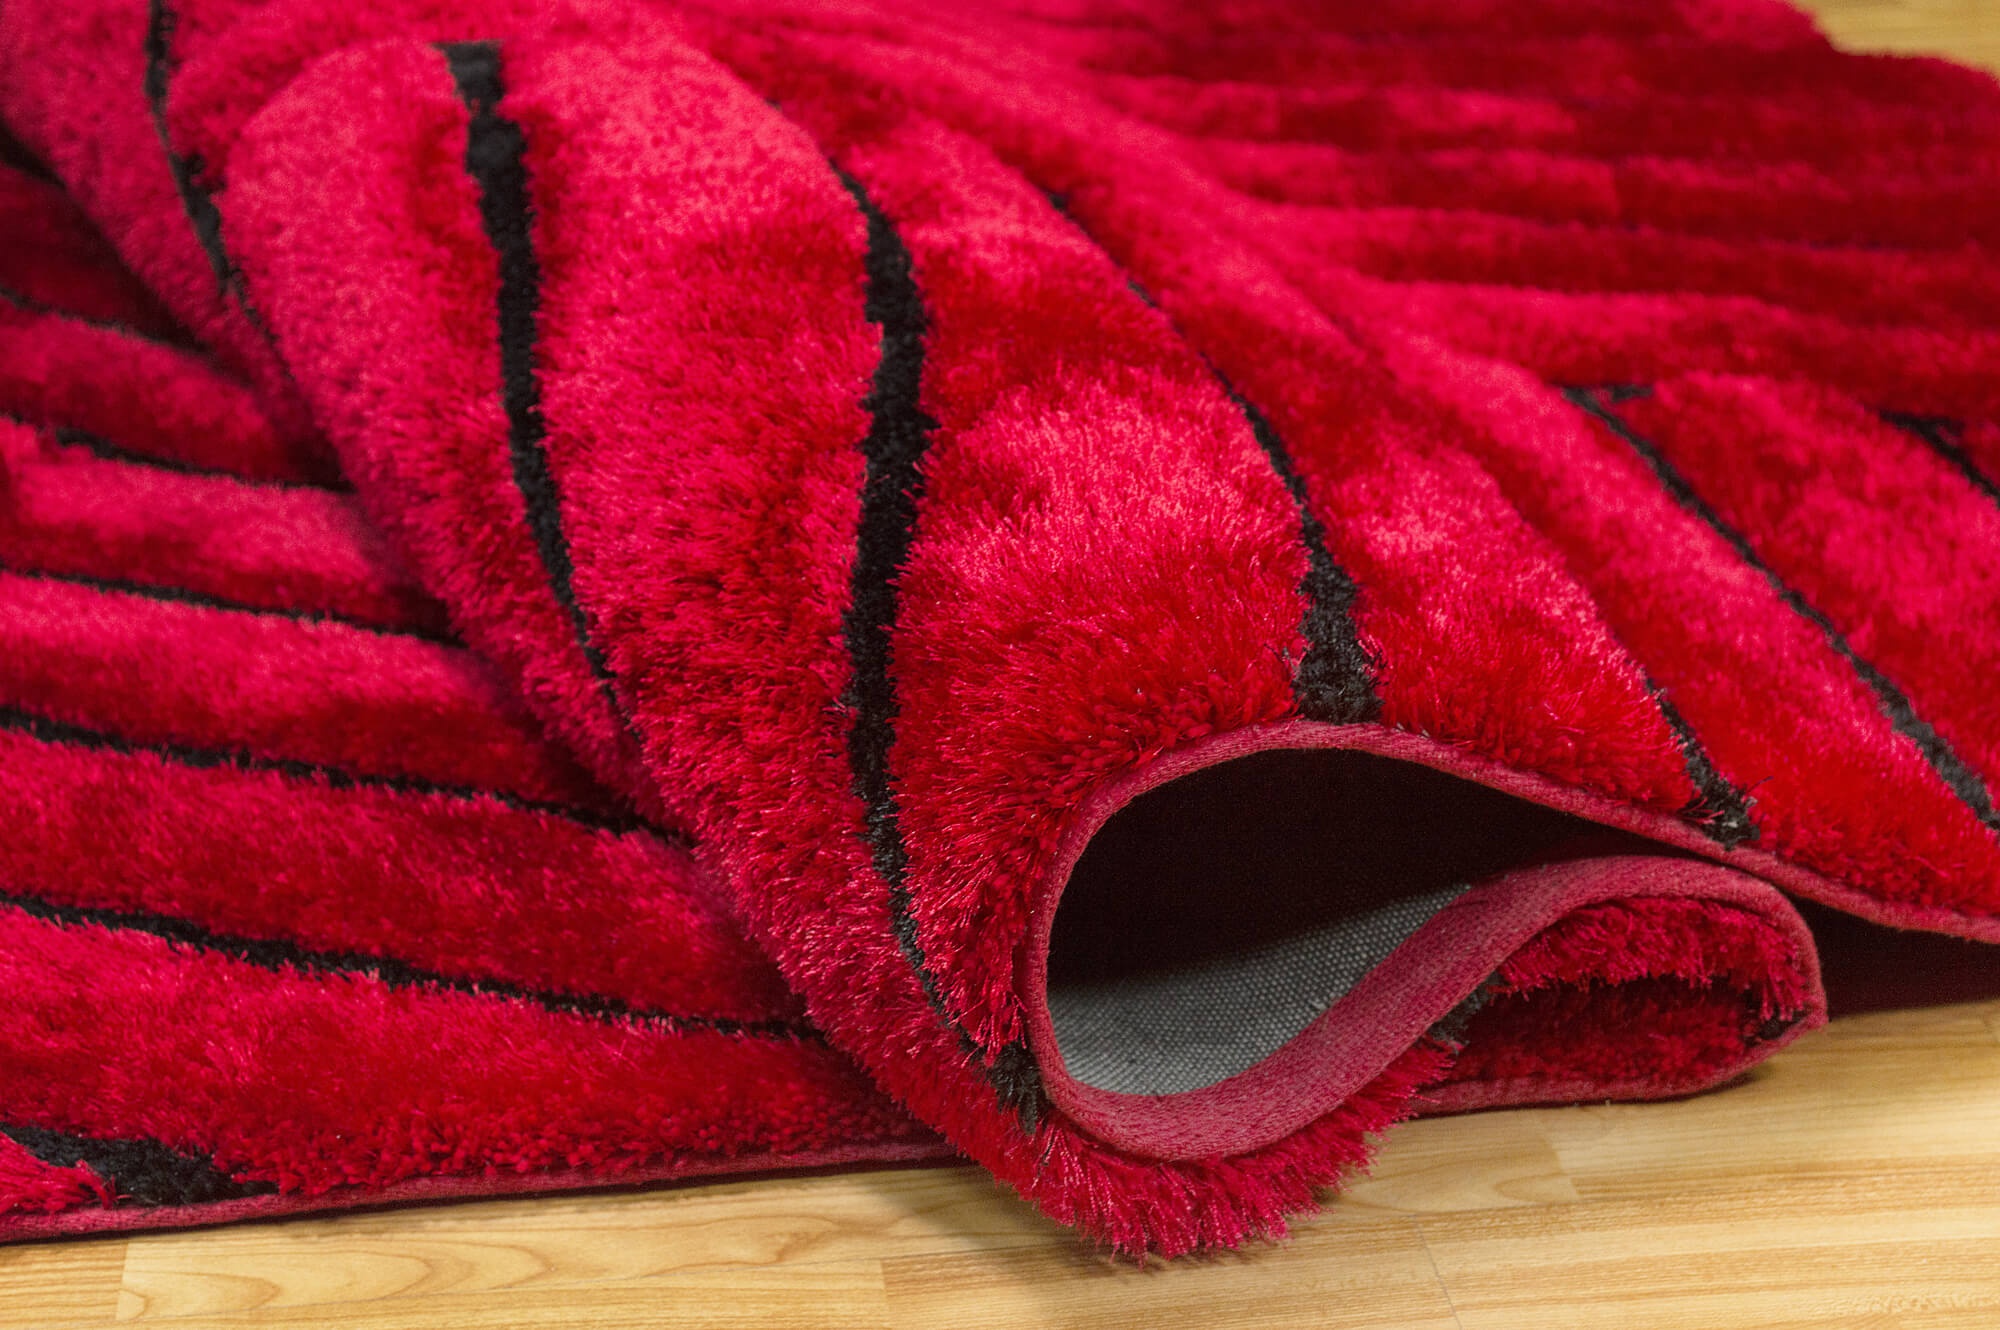 800 3D Shag in Red and Black Rug 5x7 folded product image